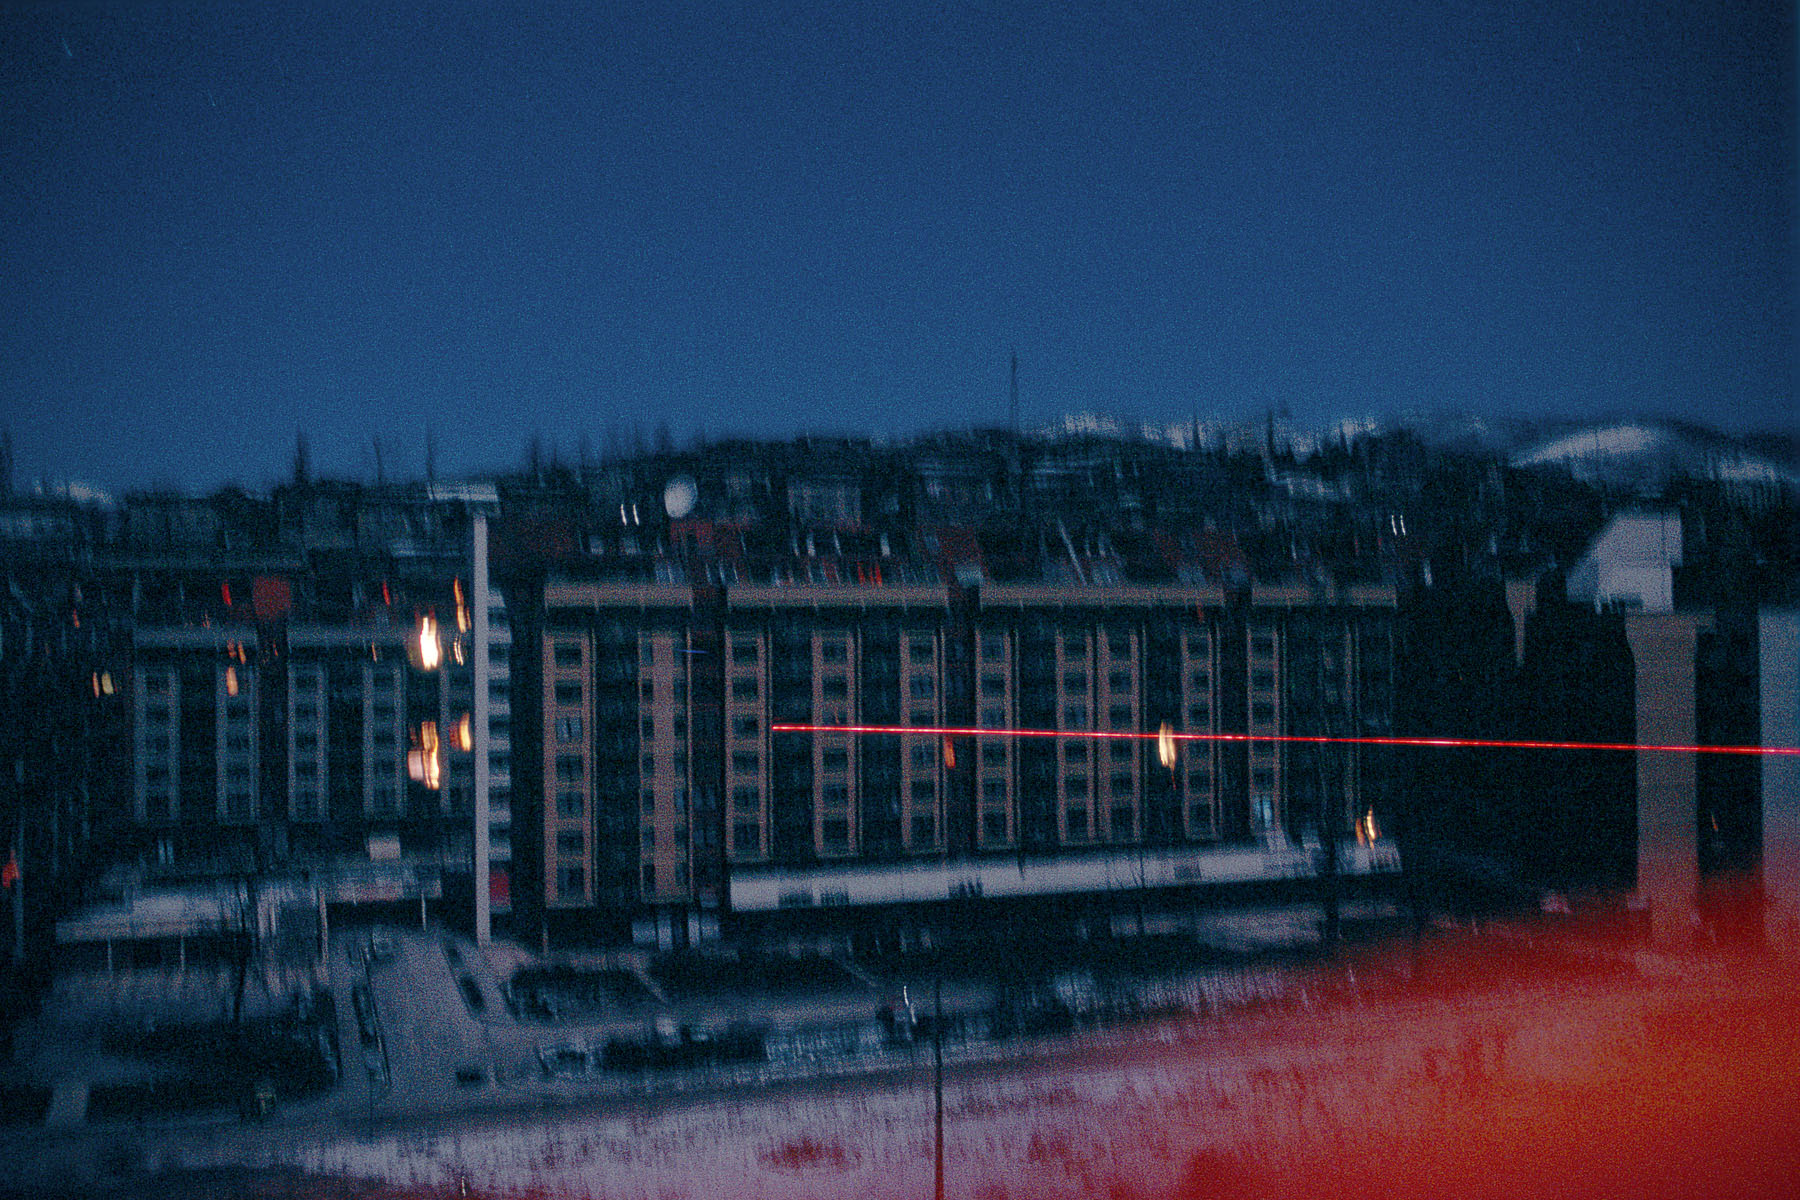 Serb snipers shooting at Bosnian houses in January 1994